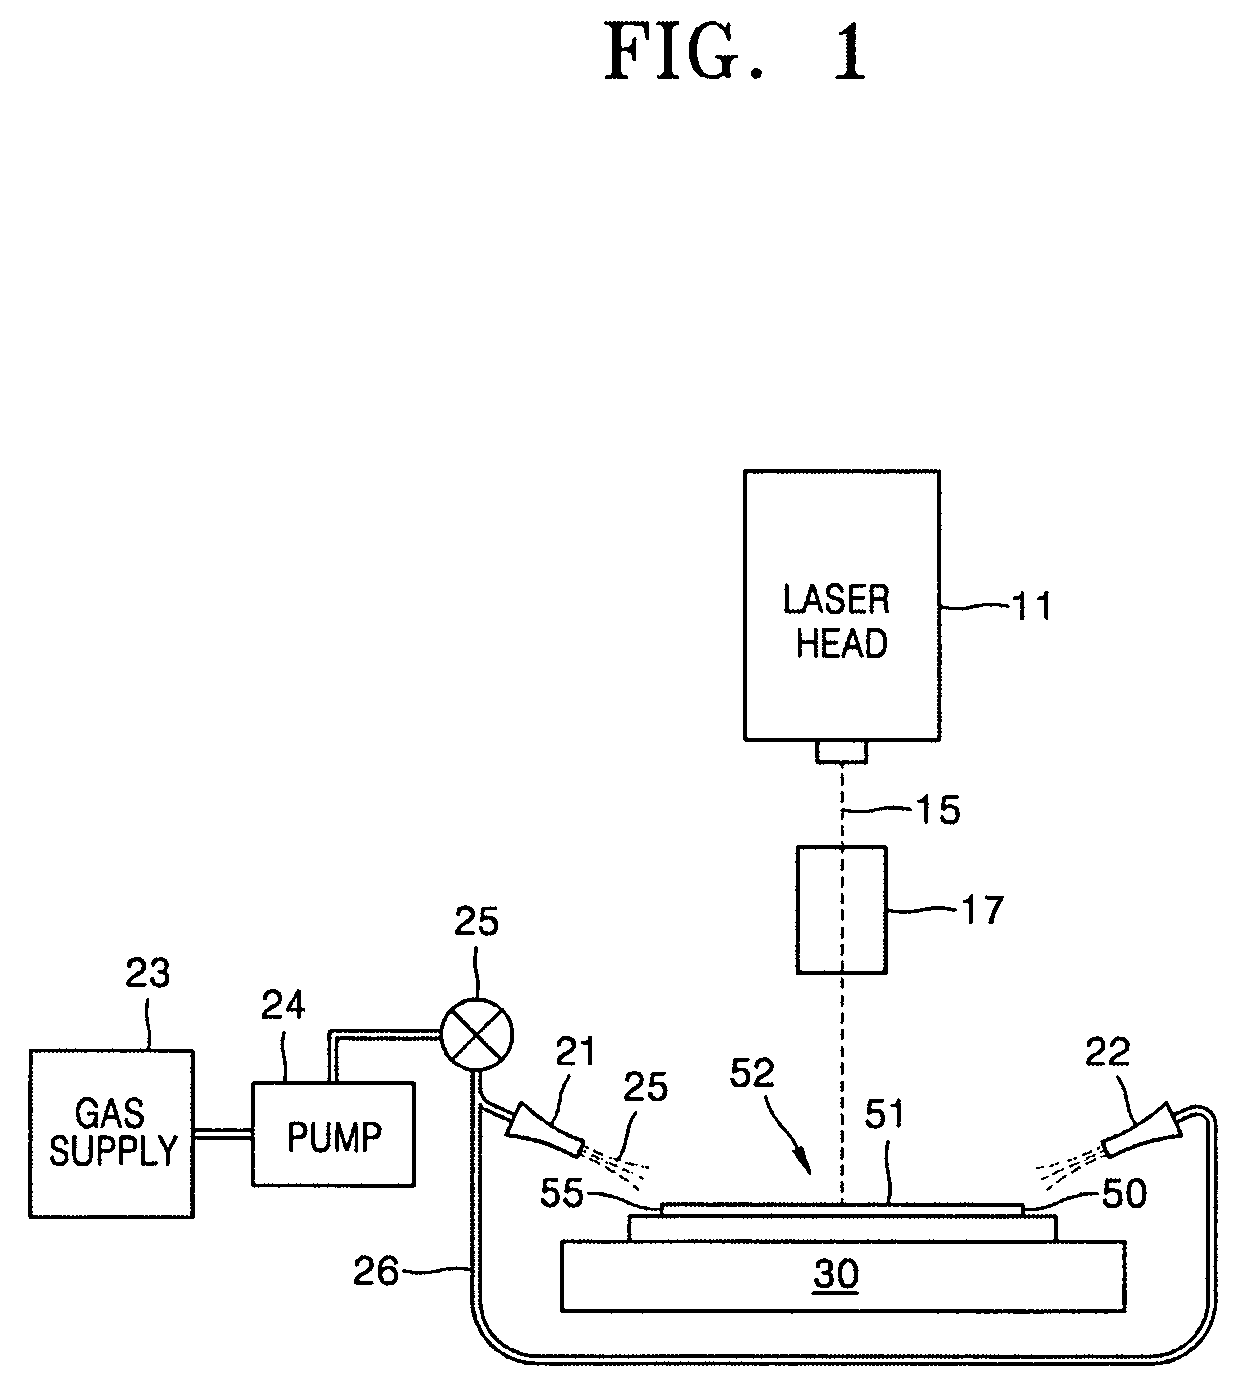 Laser annealing apparatus for processing semiconductor devices in inline manner